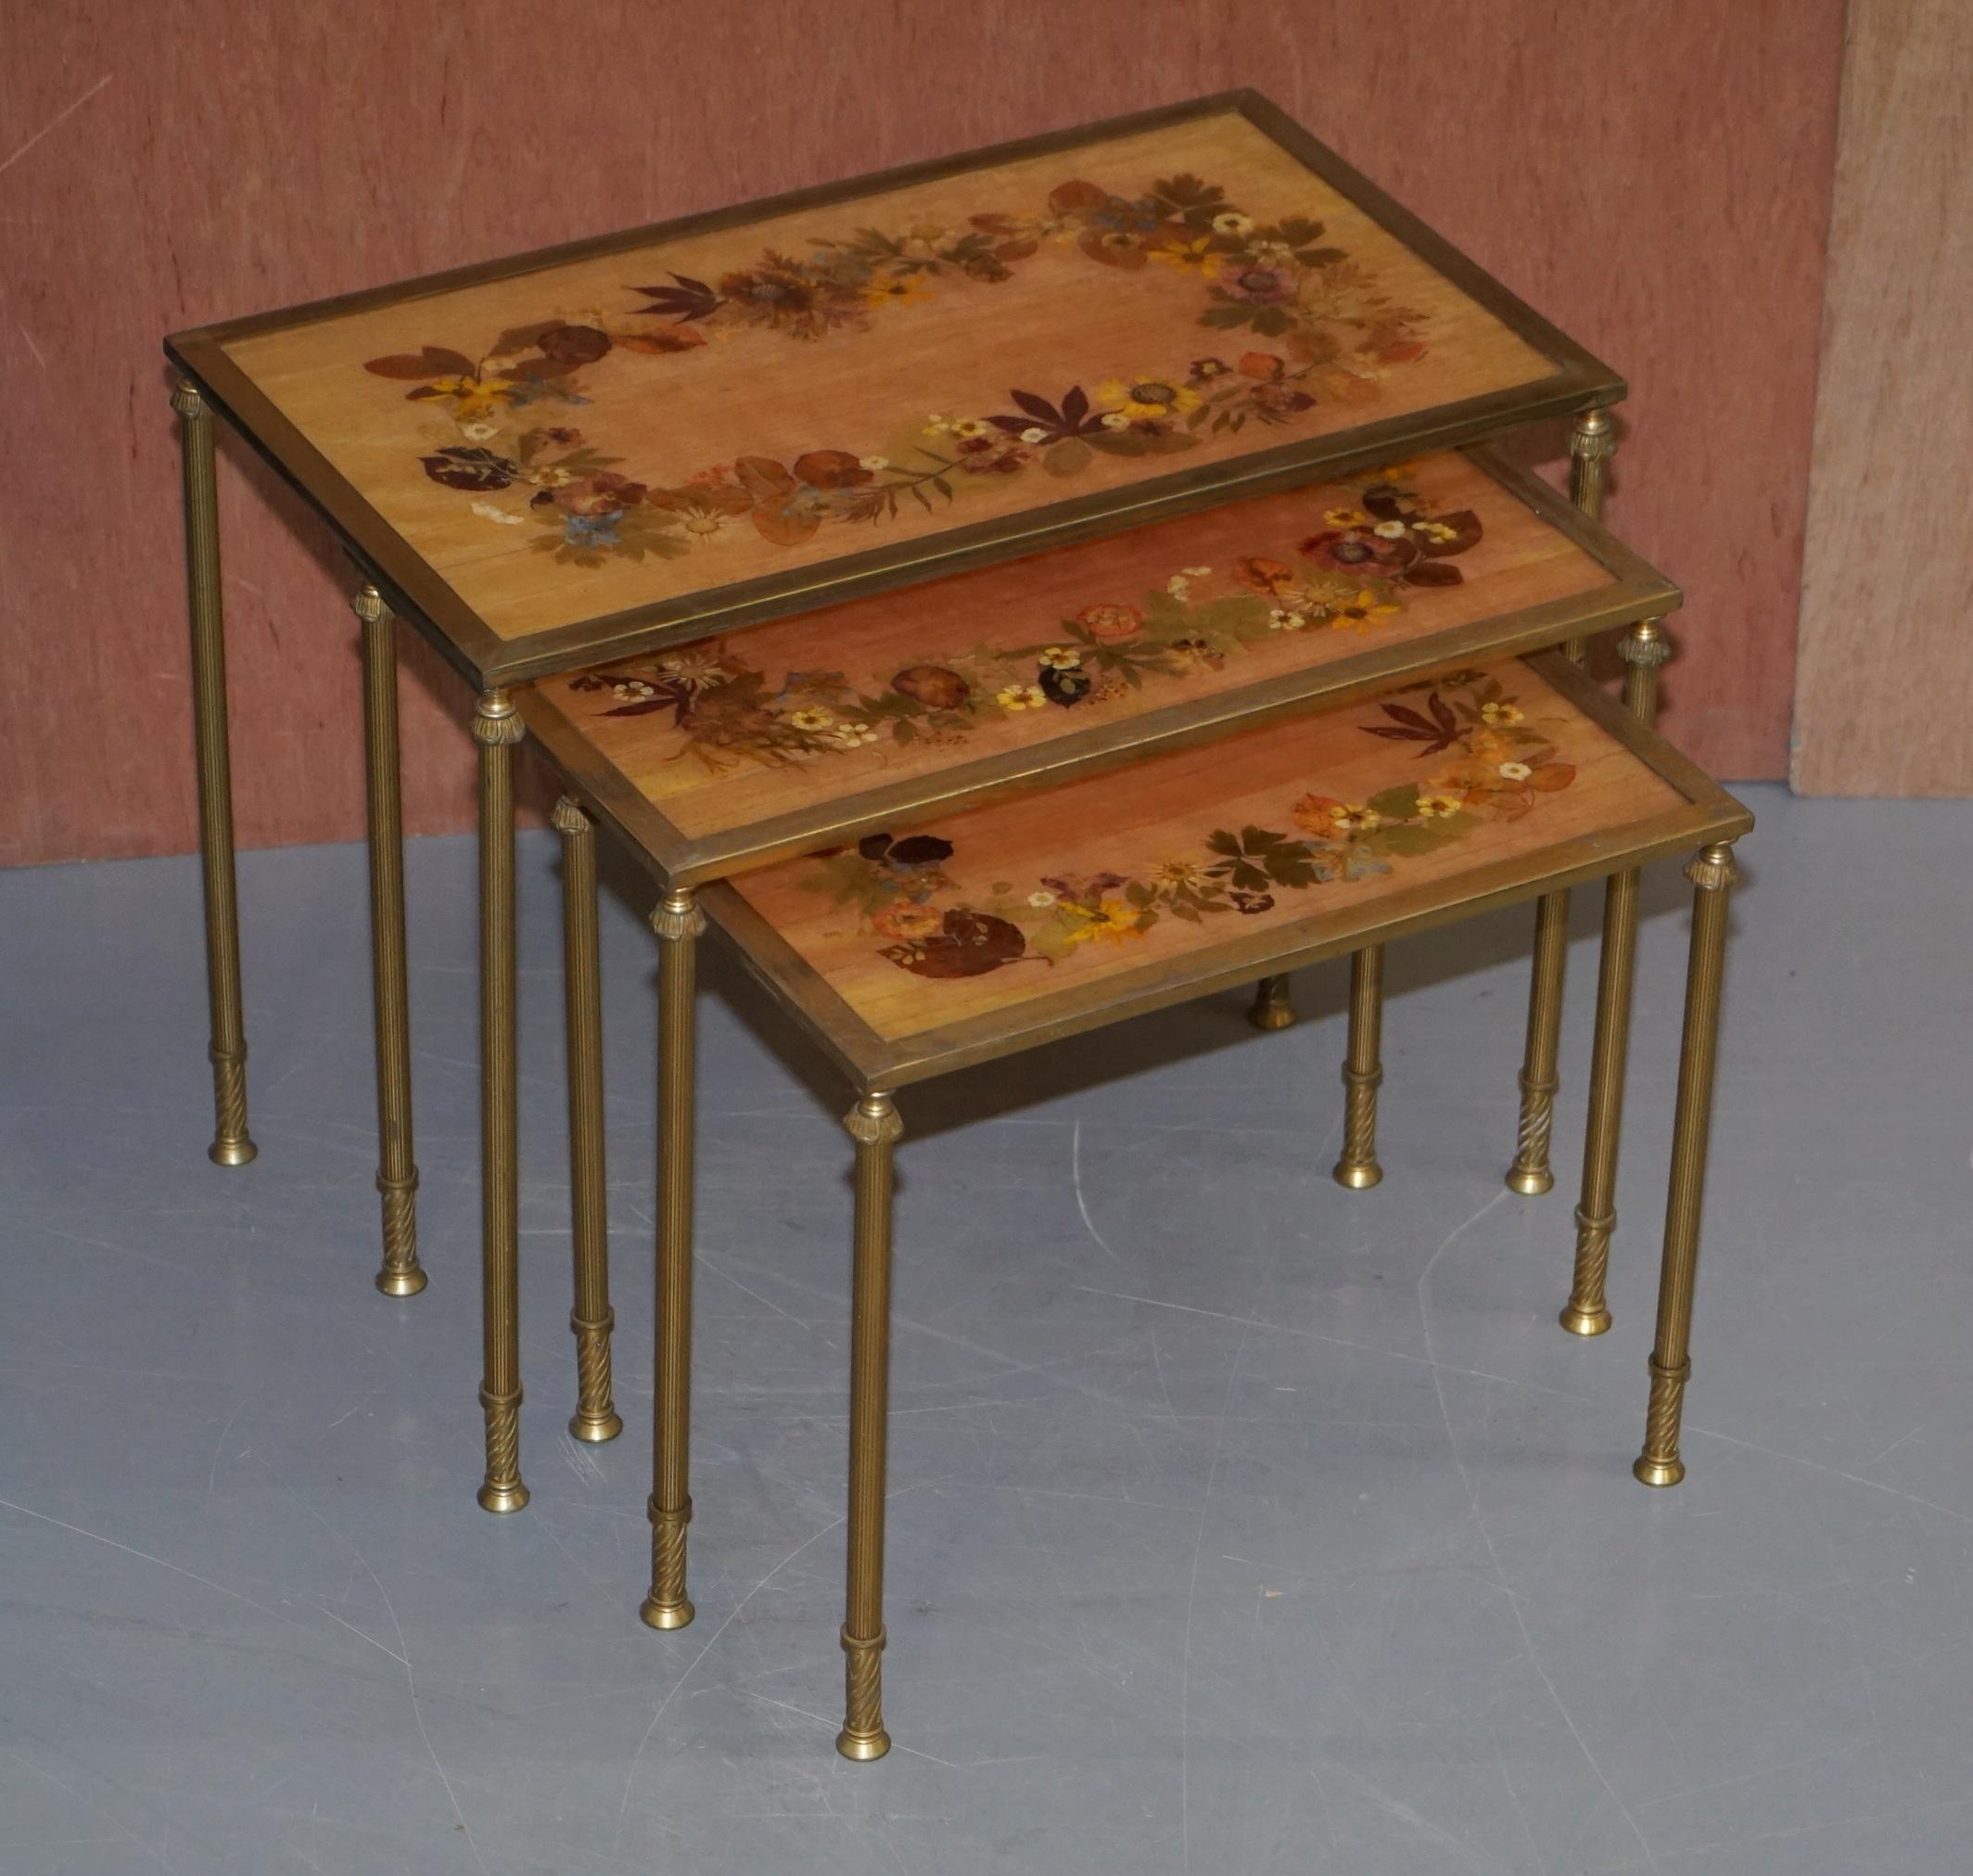 We are delighted to offer for sale this rare and collectable antique nest of three French pressed flower tables with bronzed frames

I have never seen tables like this before, they have the most wonderful pressed flower tops which have been set in